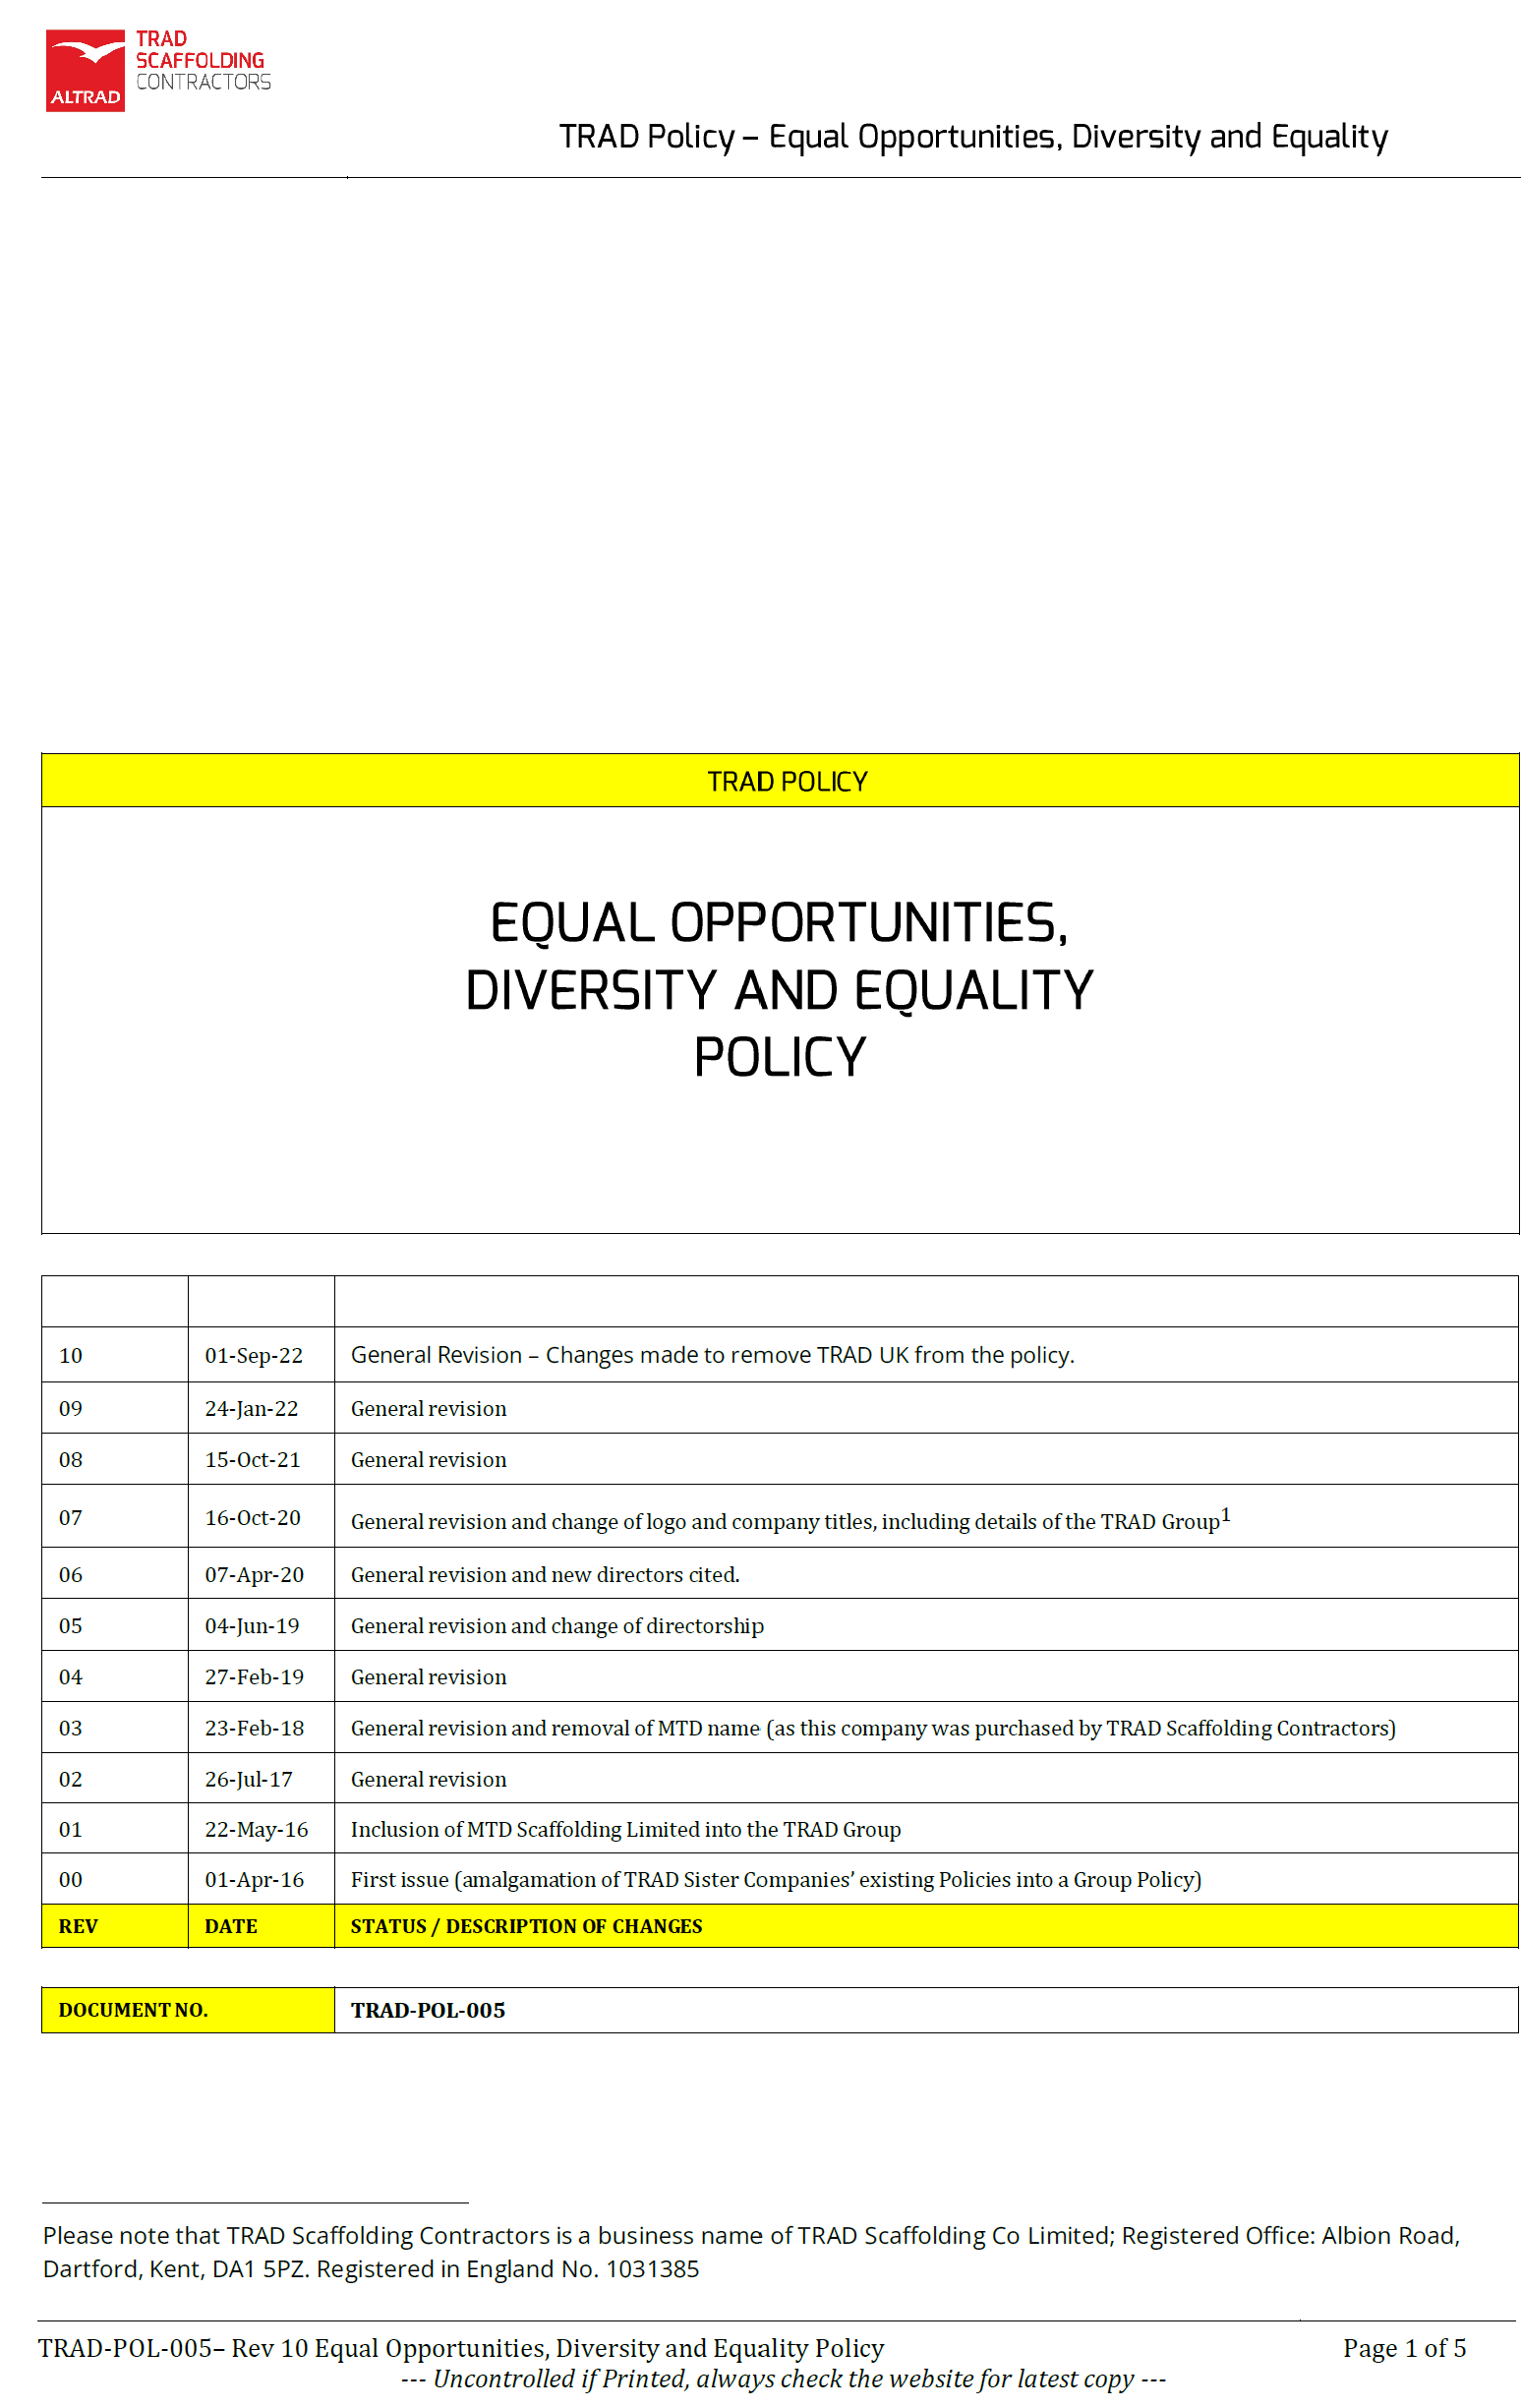 Equal Opportunities, Diversity and Equality Policy-13-2022